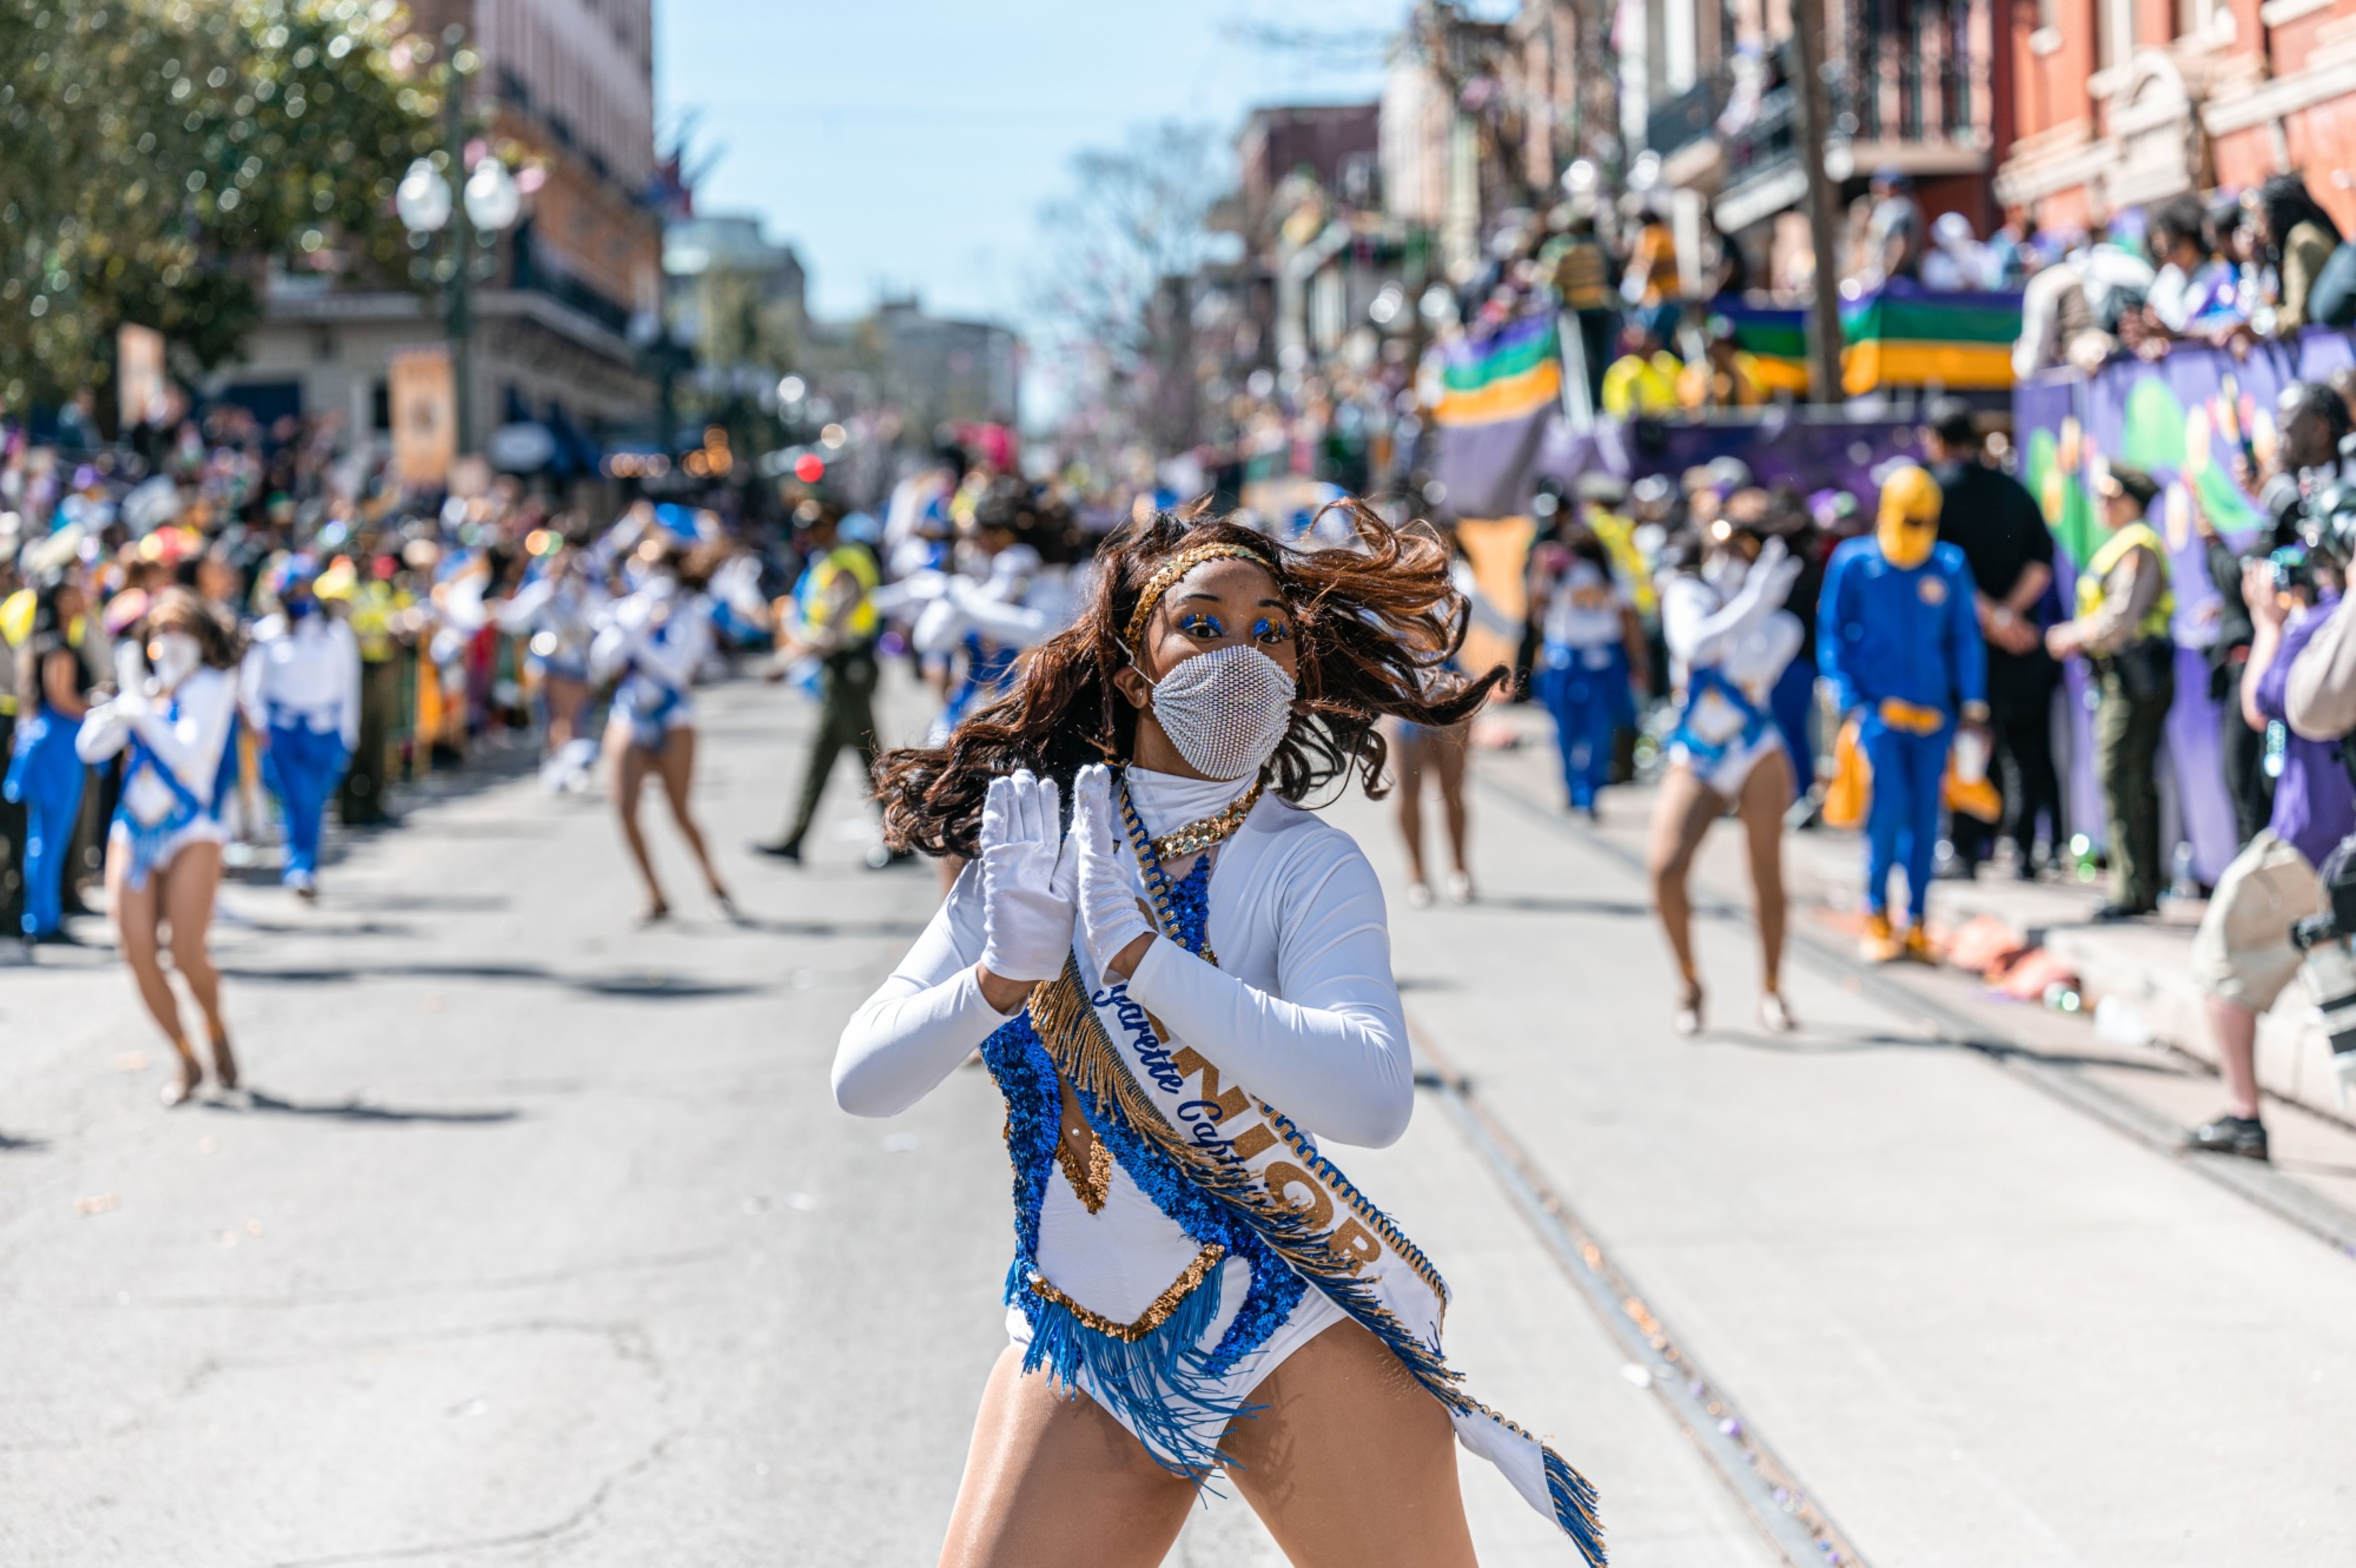 How the Krewes of Mardi Gras Keep New Orleans Together